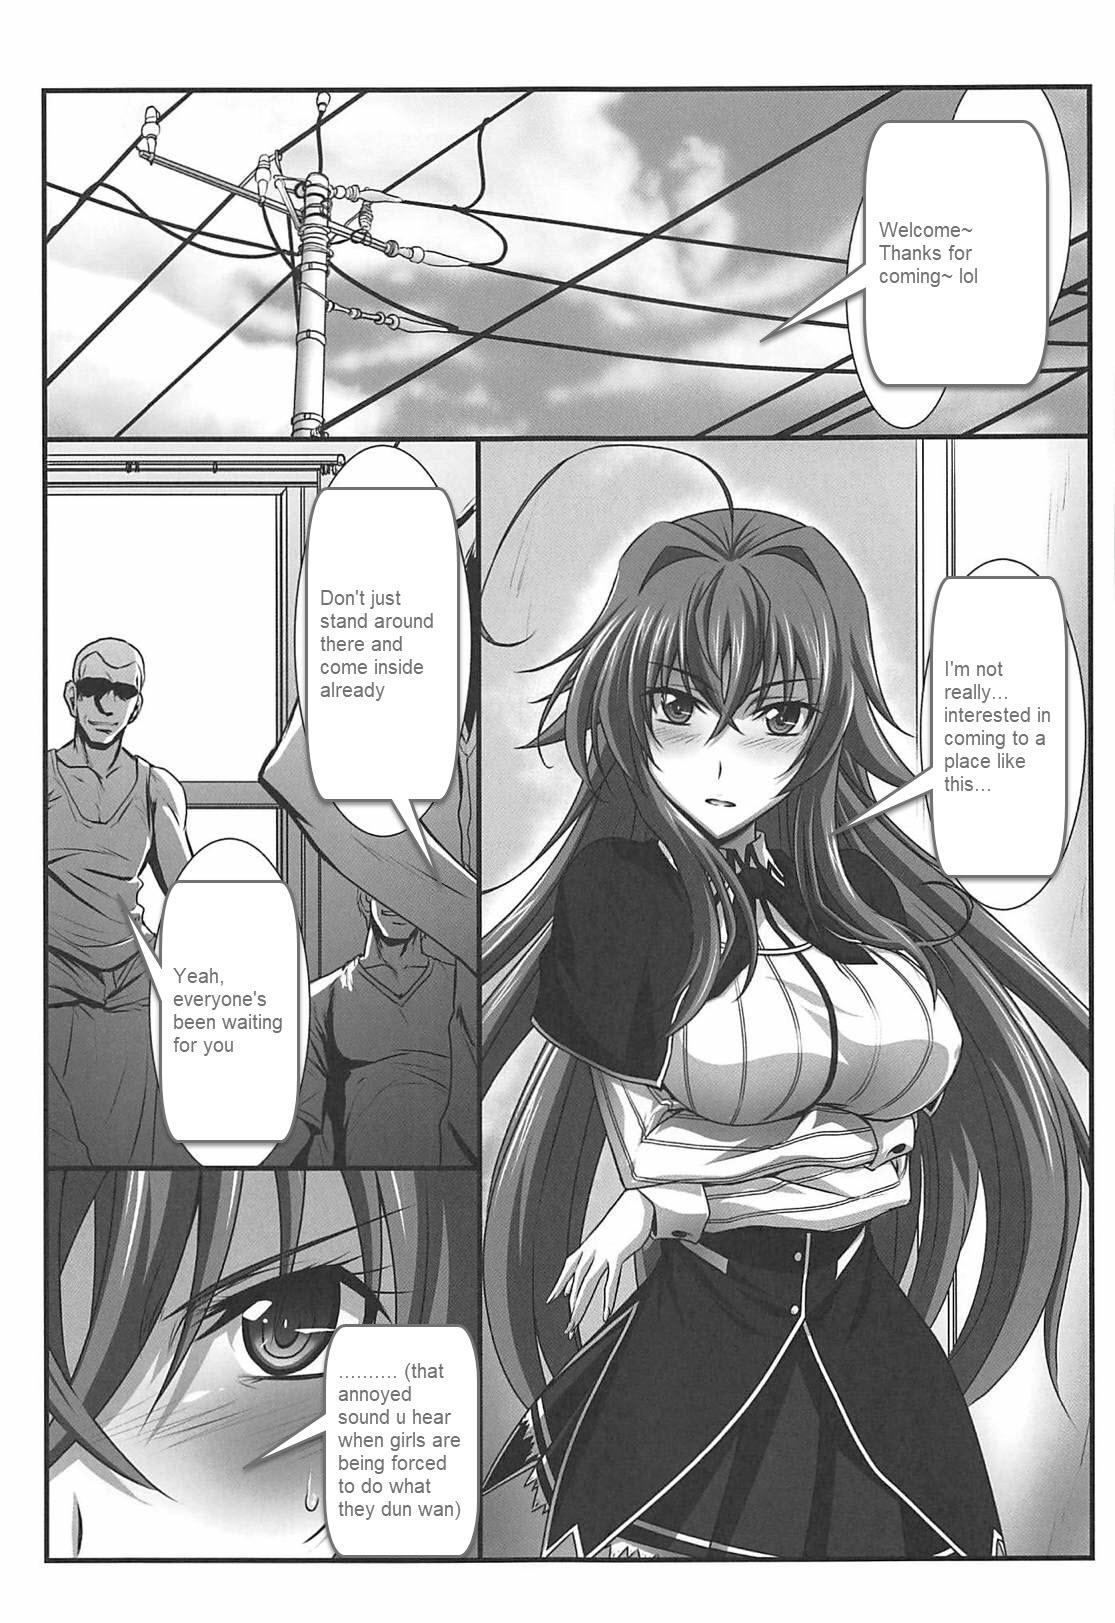 Foot Job SPIRAL ZONE DxD II - Highschool dxd Gay Blowjob - Page 4